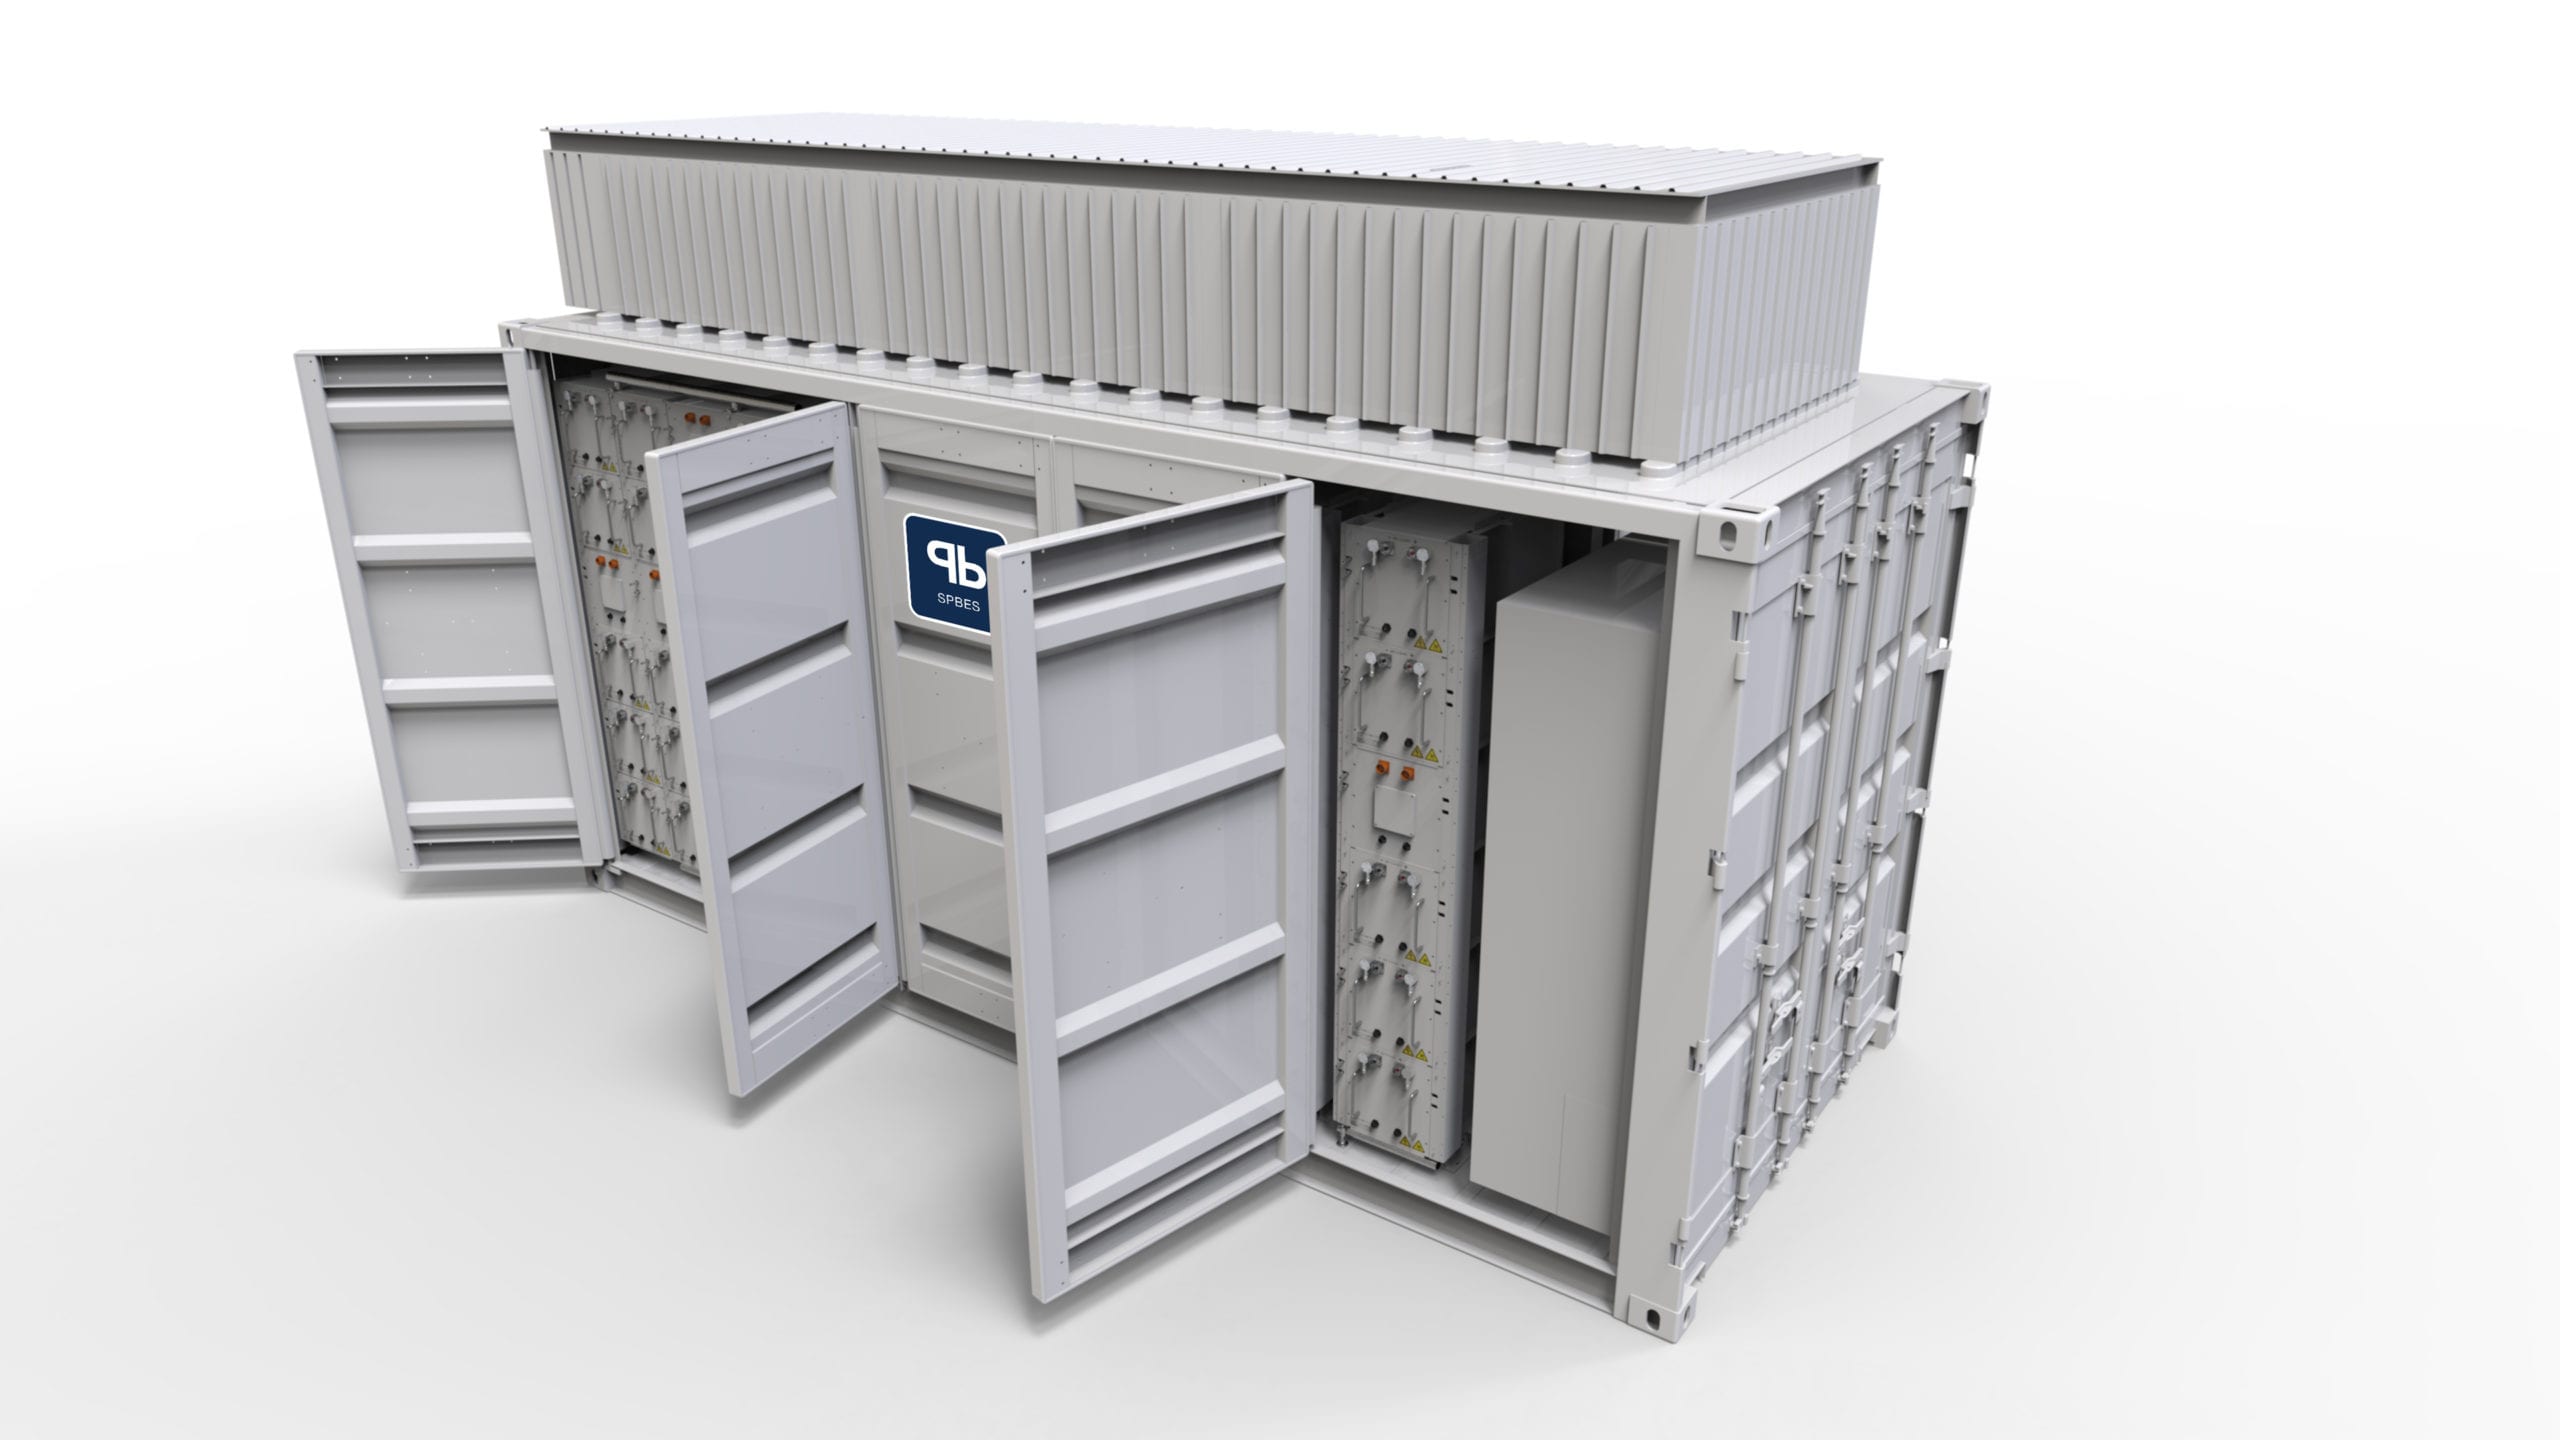 CanPower – Microgrid in a Box